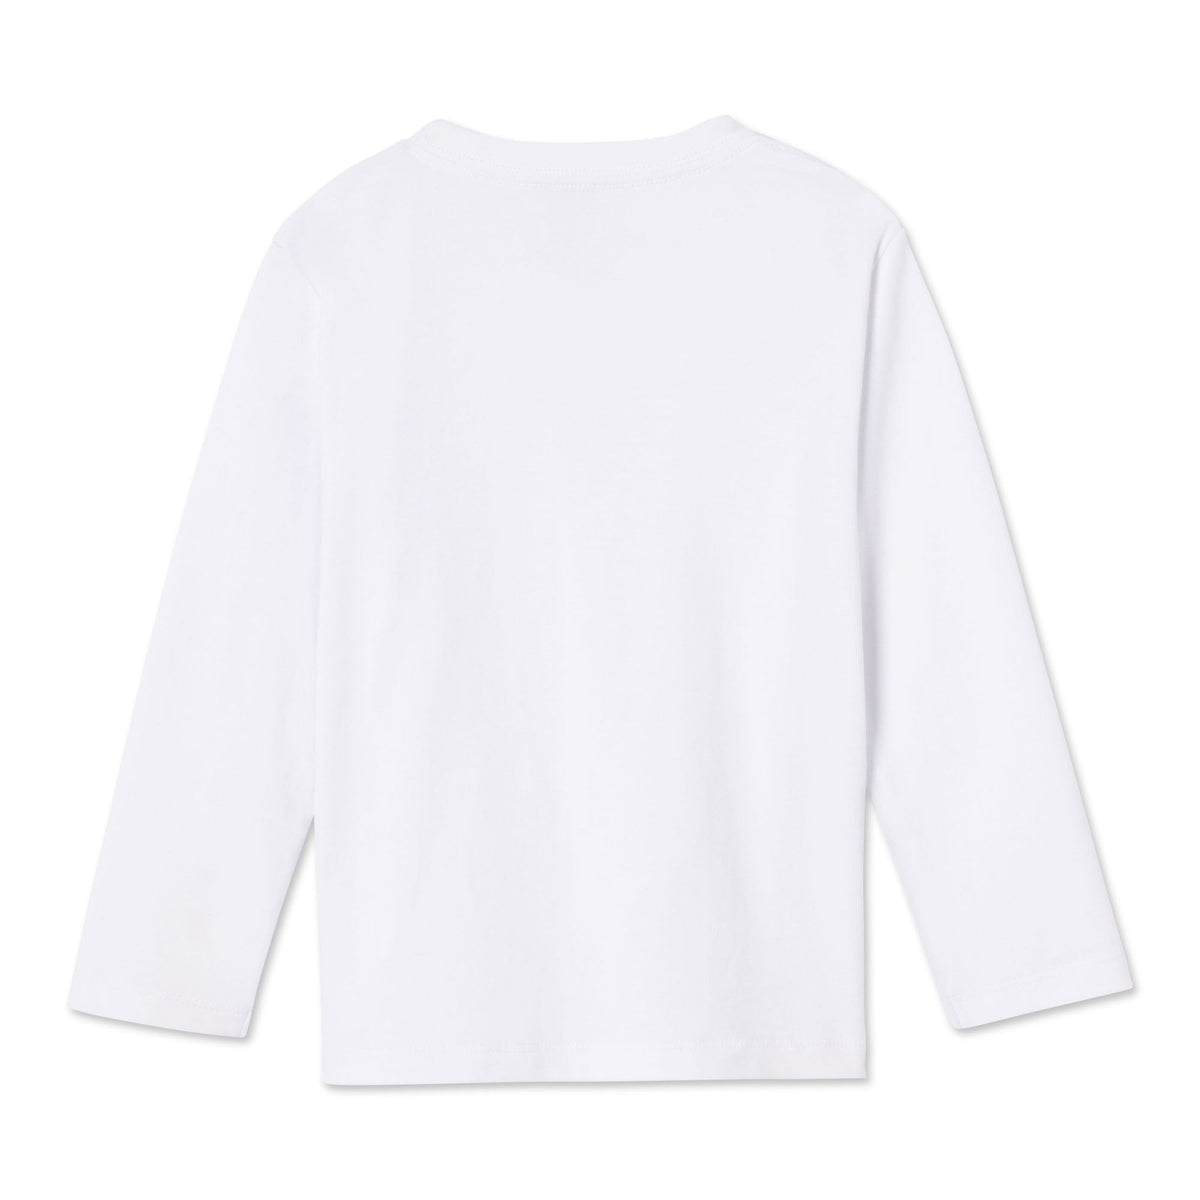 Classic and Preppy Kellan Long Sleeve Pocket Tee, Bright White-Shirts and Tops-CPC - Classic Prep Childrenswear